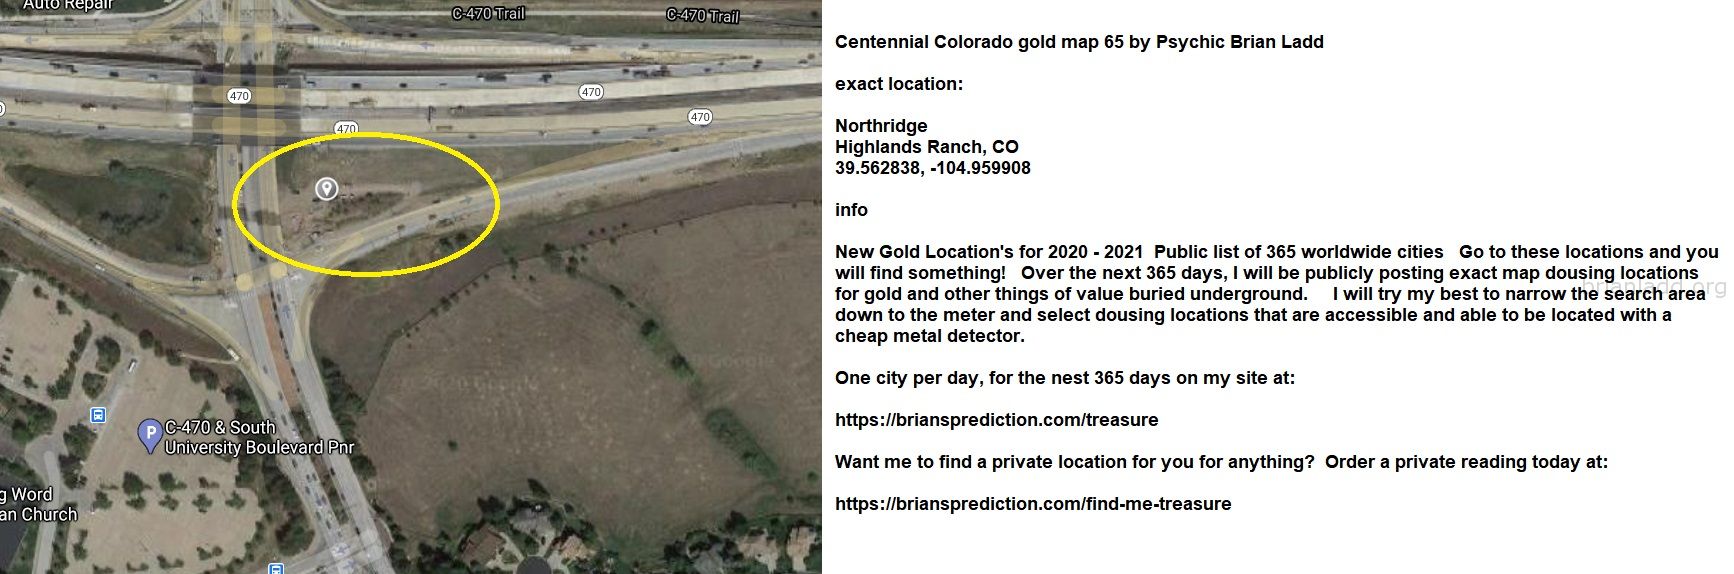 Centennial Colorado gold map 65 by Psychic Brian Ladd
New Gold Location's for 2020 - 2021  Public list of 365 worldwide cities   Go to these locations and you will find something!   Over the next 365 days, I will be publicly posting exact map dousing locations for gold and other things of value buried underground.     I will try my best to narrow the search area down to the meter and select dousing locations that are accessible and able to be located with a cheap metal detector. One city per day, for the nest 365 days on my site at:  https://briansprediction.com/treasure  Want me to find a private location for you for anything?  Order a private reading today at:  https://briansprediction.com/find-me-treasure
